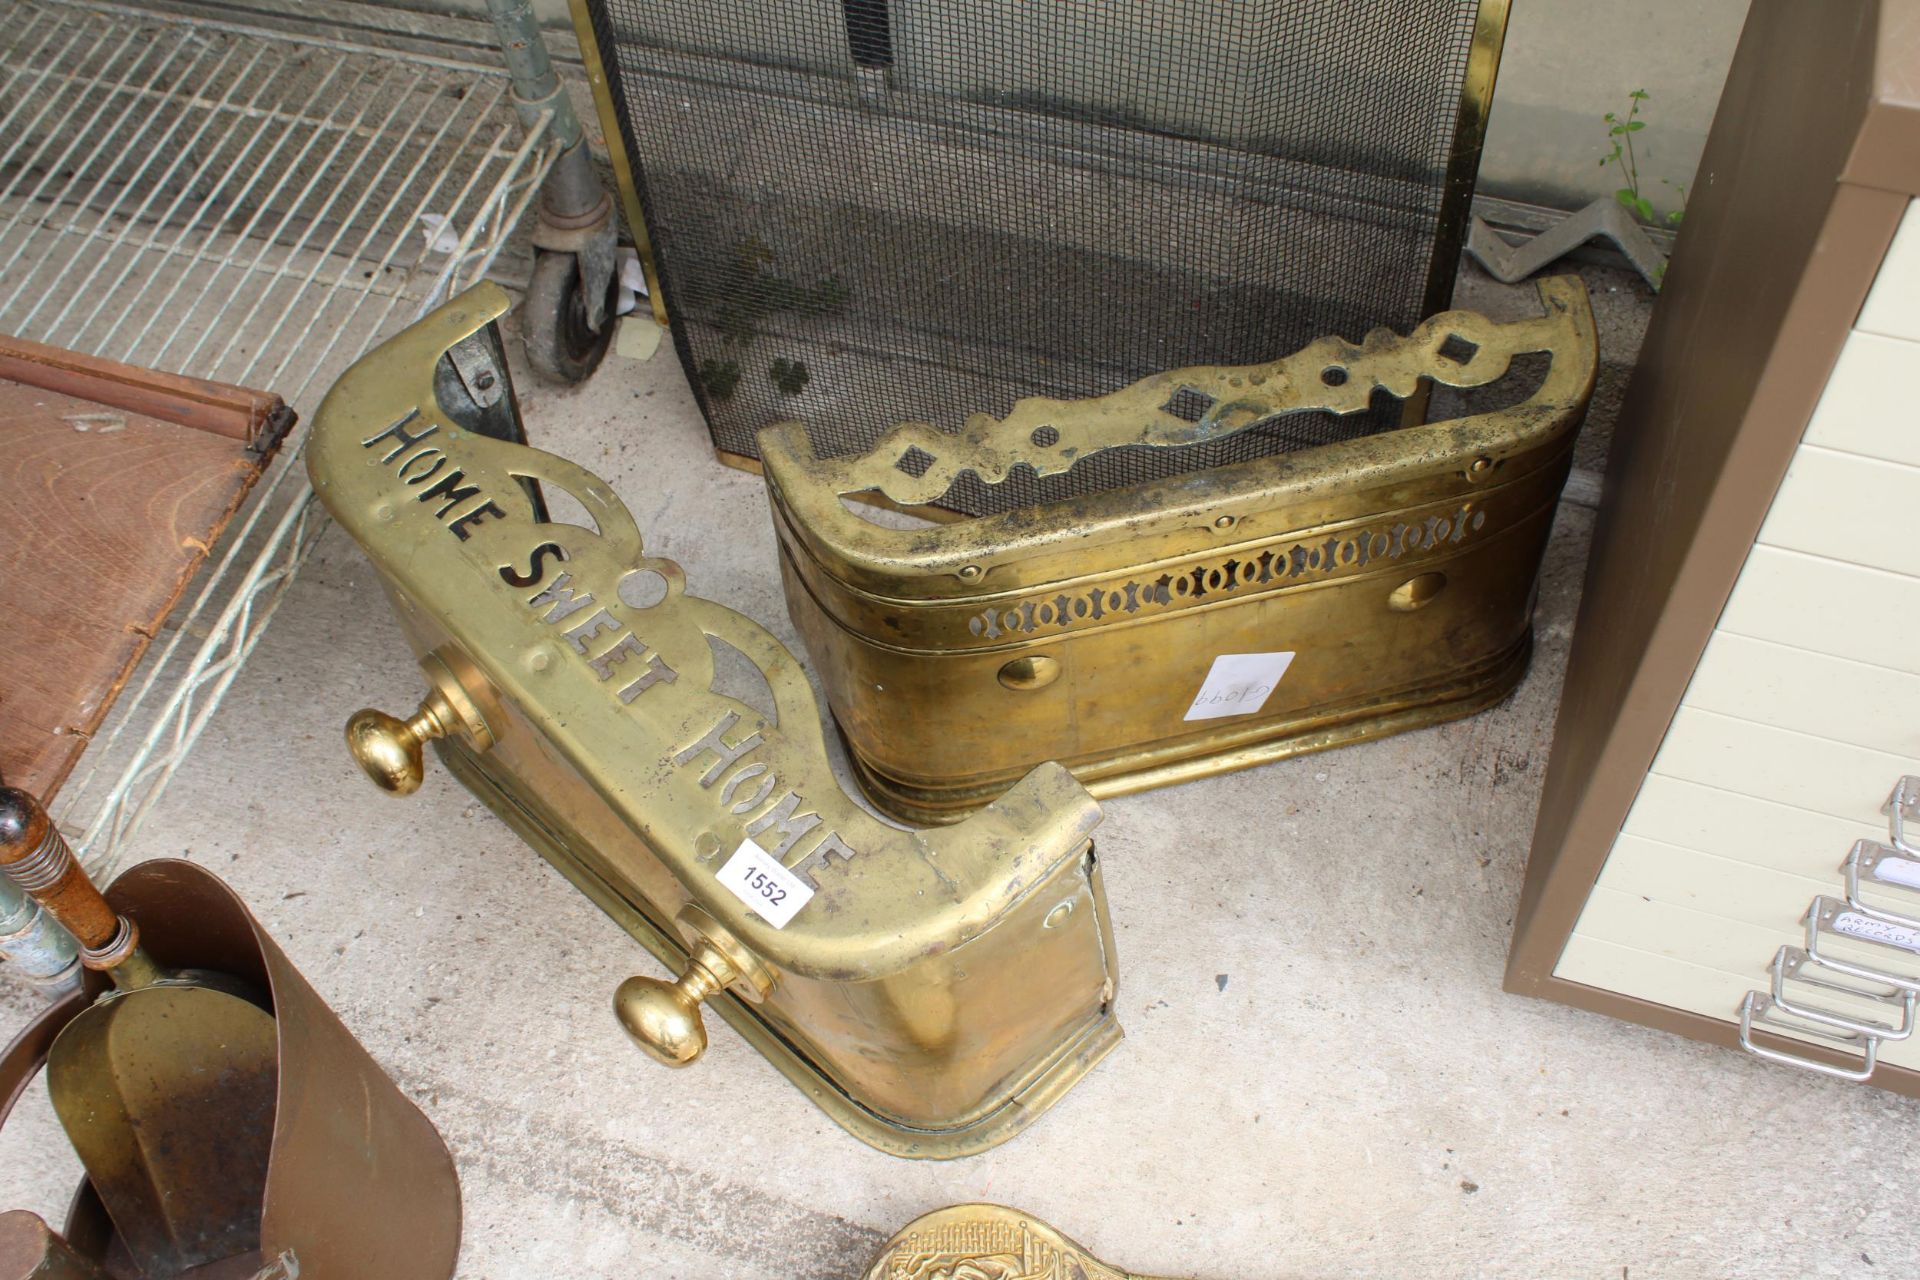 TWO BRASS FIRE FRONTS, A FIRE SCREEN AND BRASS BELOWS ETC - Image 2 of 2